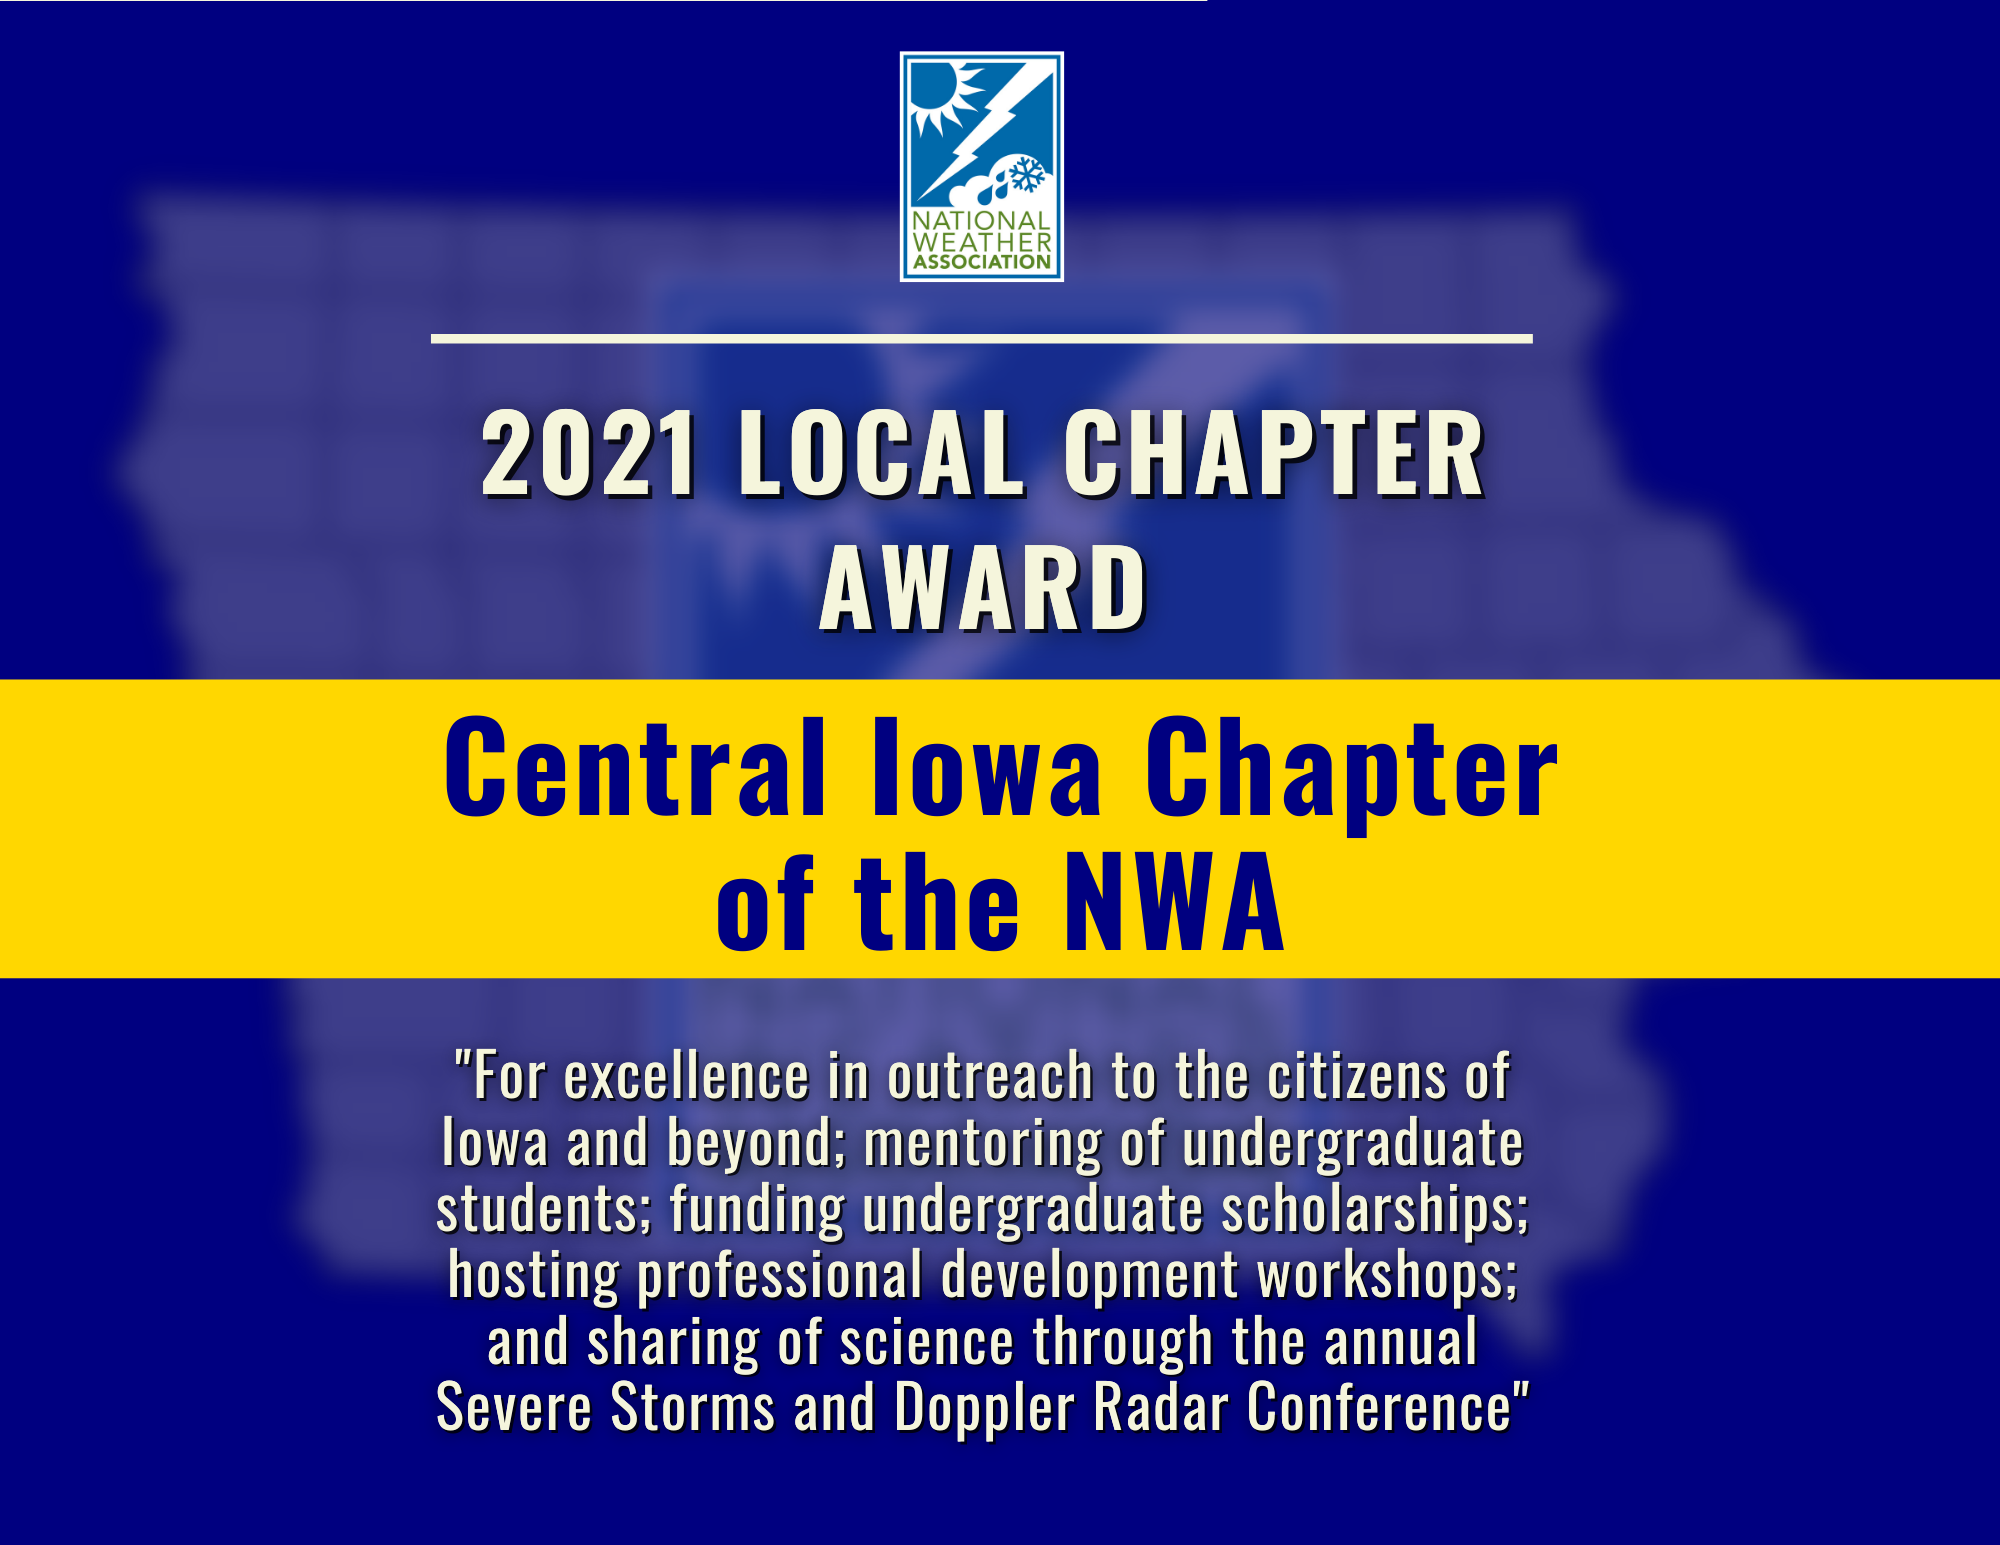 2021 Local Chapter Award: Central Iowa Chapter of the NWA